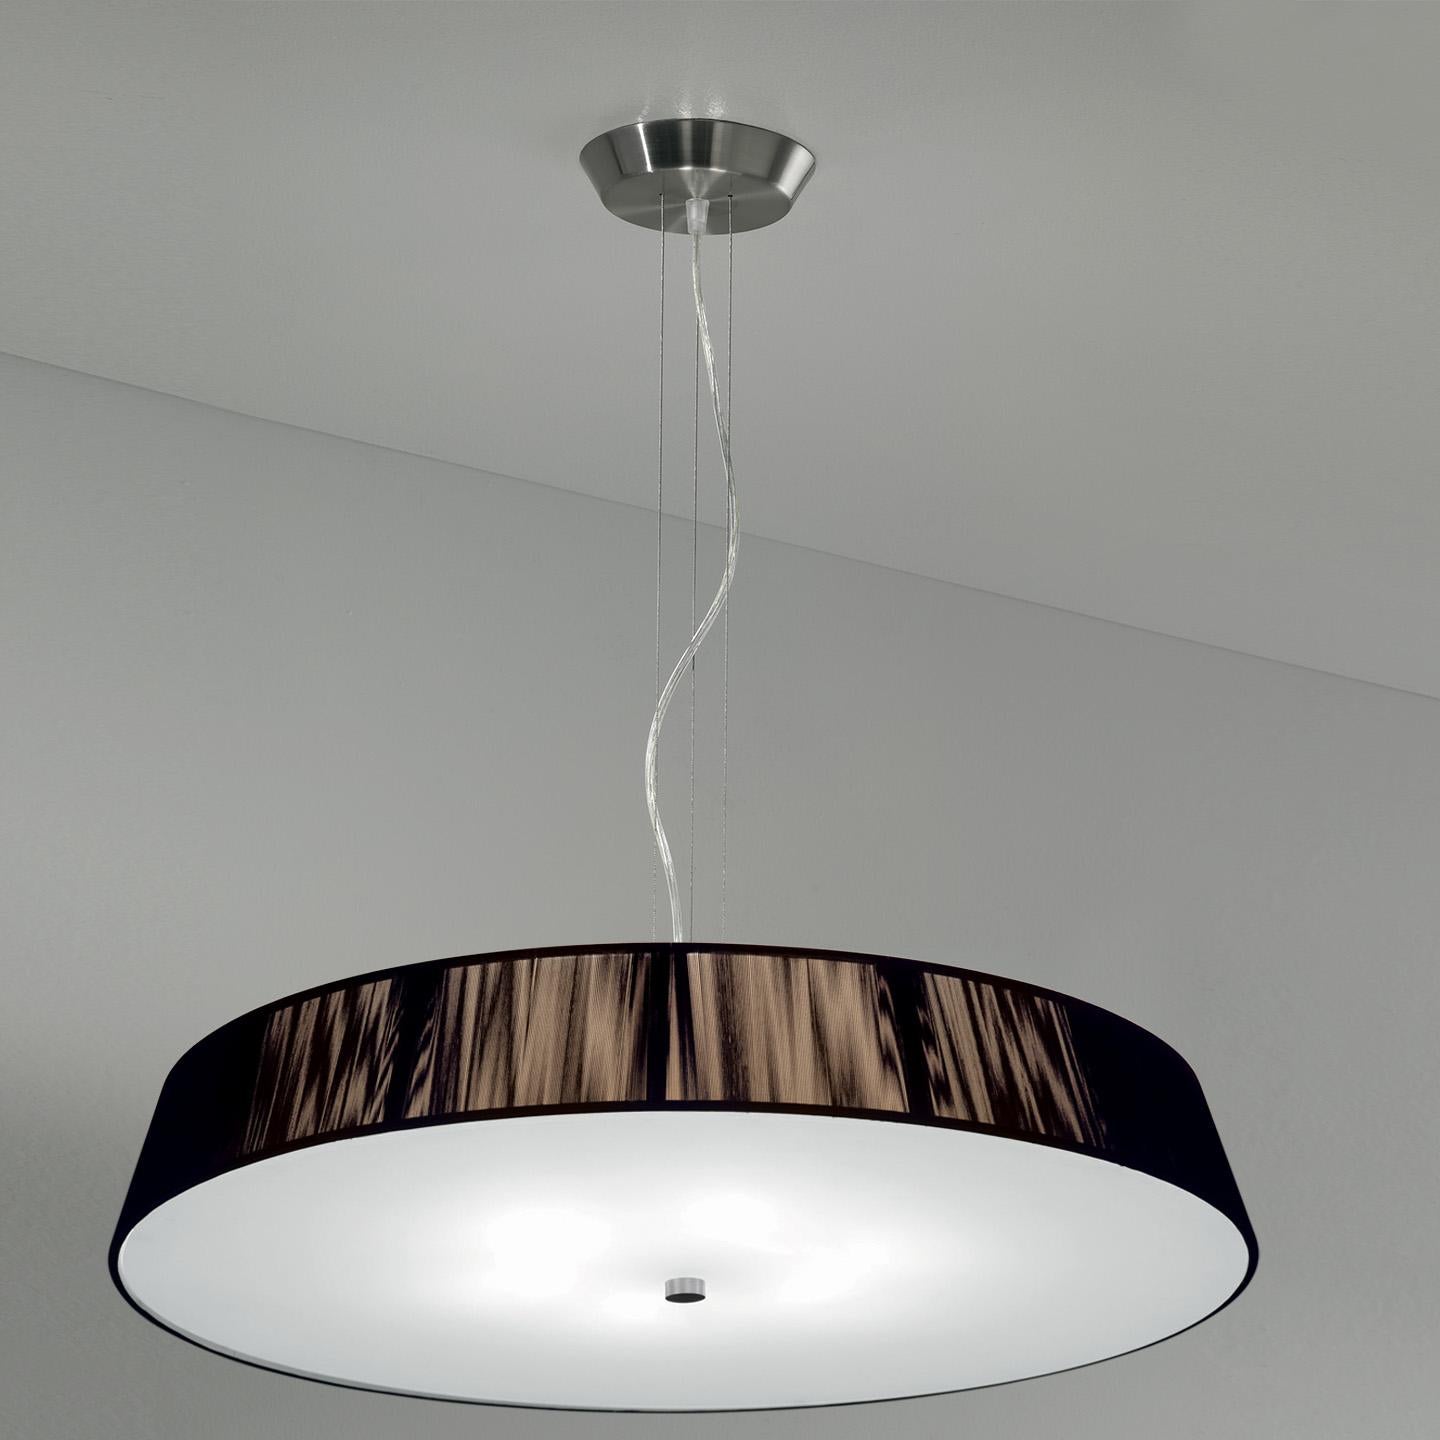 The Lilith pendant is an elegant lighting solution with a stunning light effect created by threading thin string in a consistent pattern across the shade. As you engage it from different viewpoints, the light pattern shimmers and changes. The result